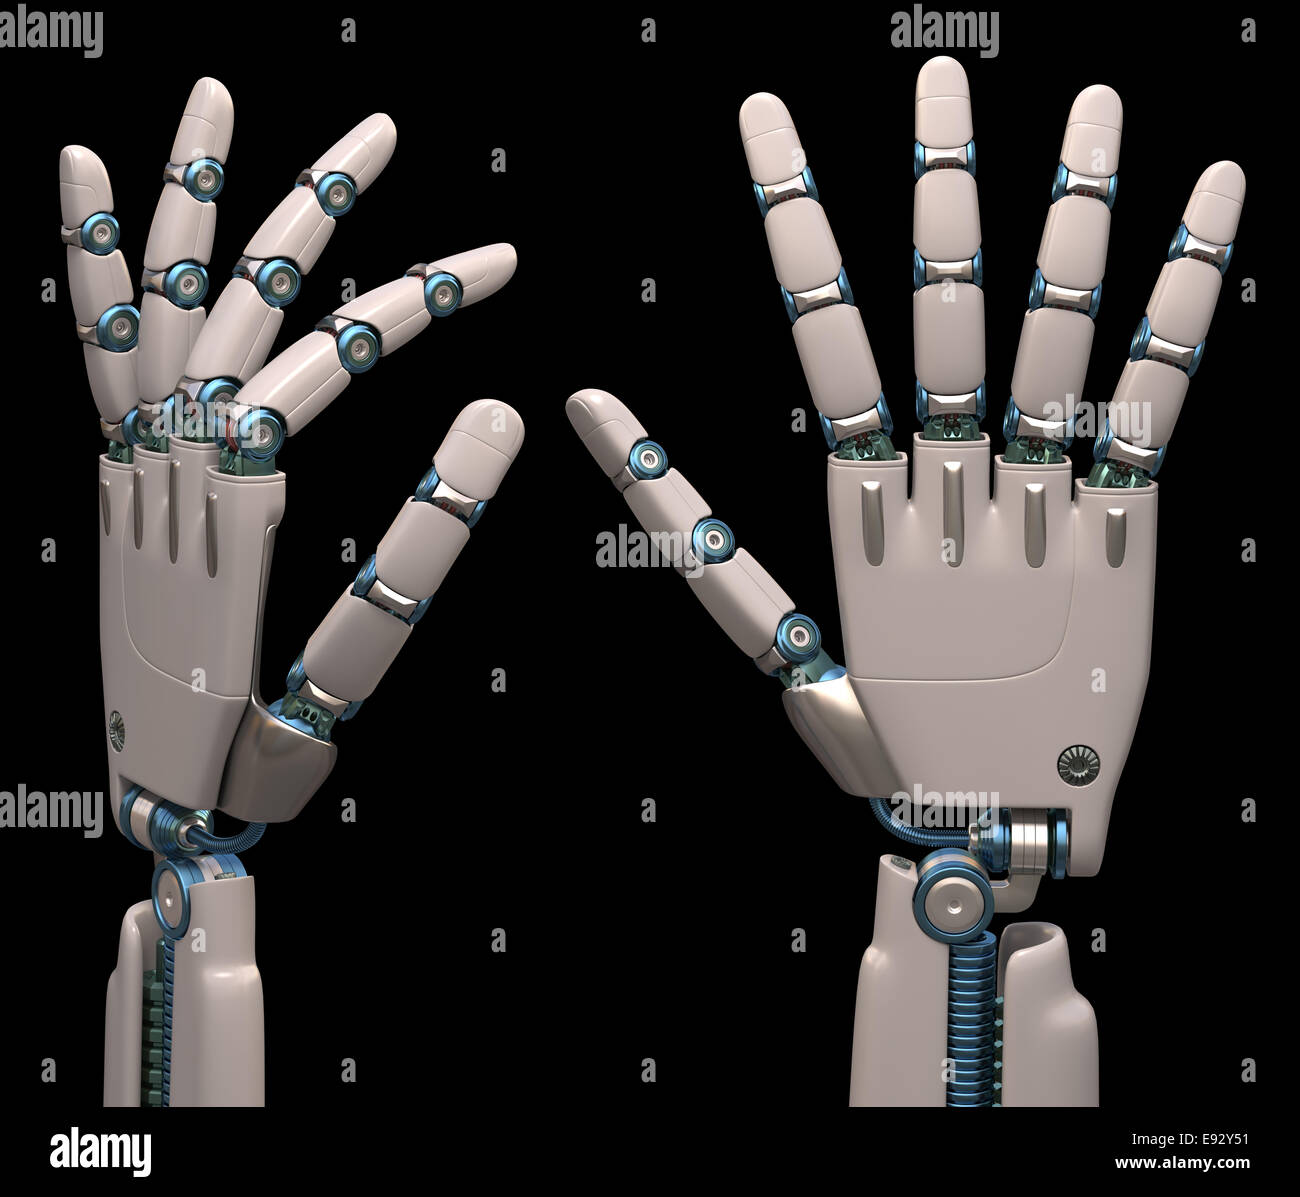 Robotic hands shaped and measures that mimic the human skeleton. Clipping path included. Stock Photo